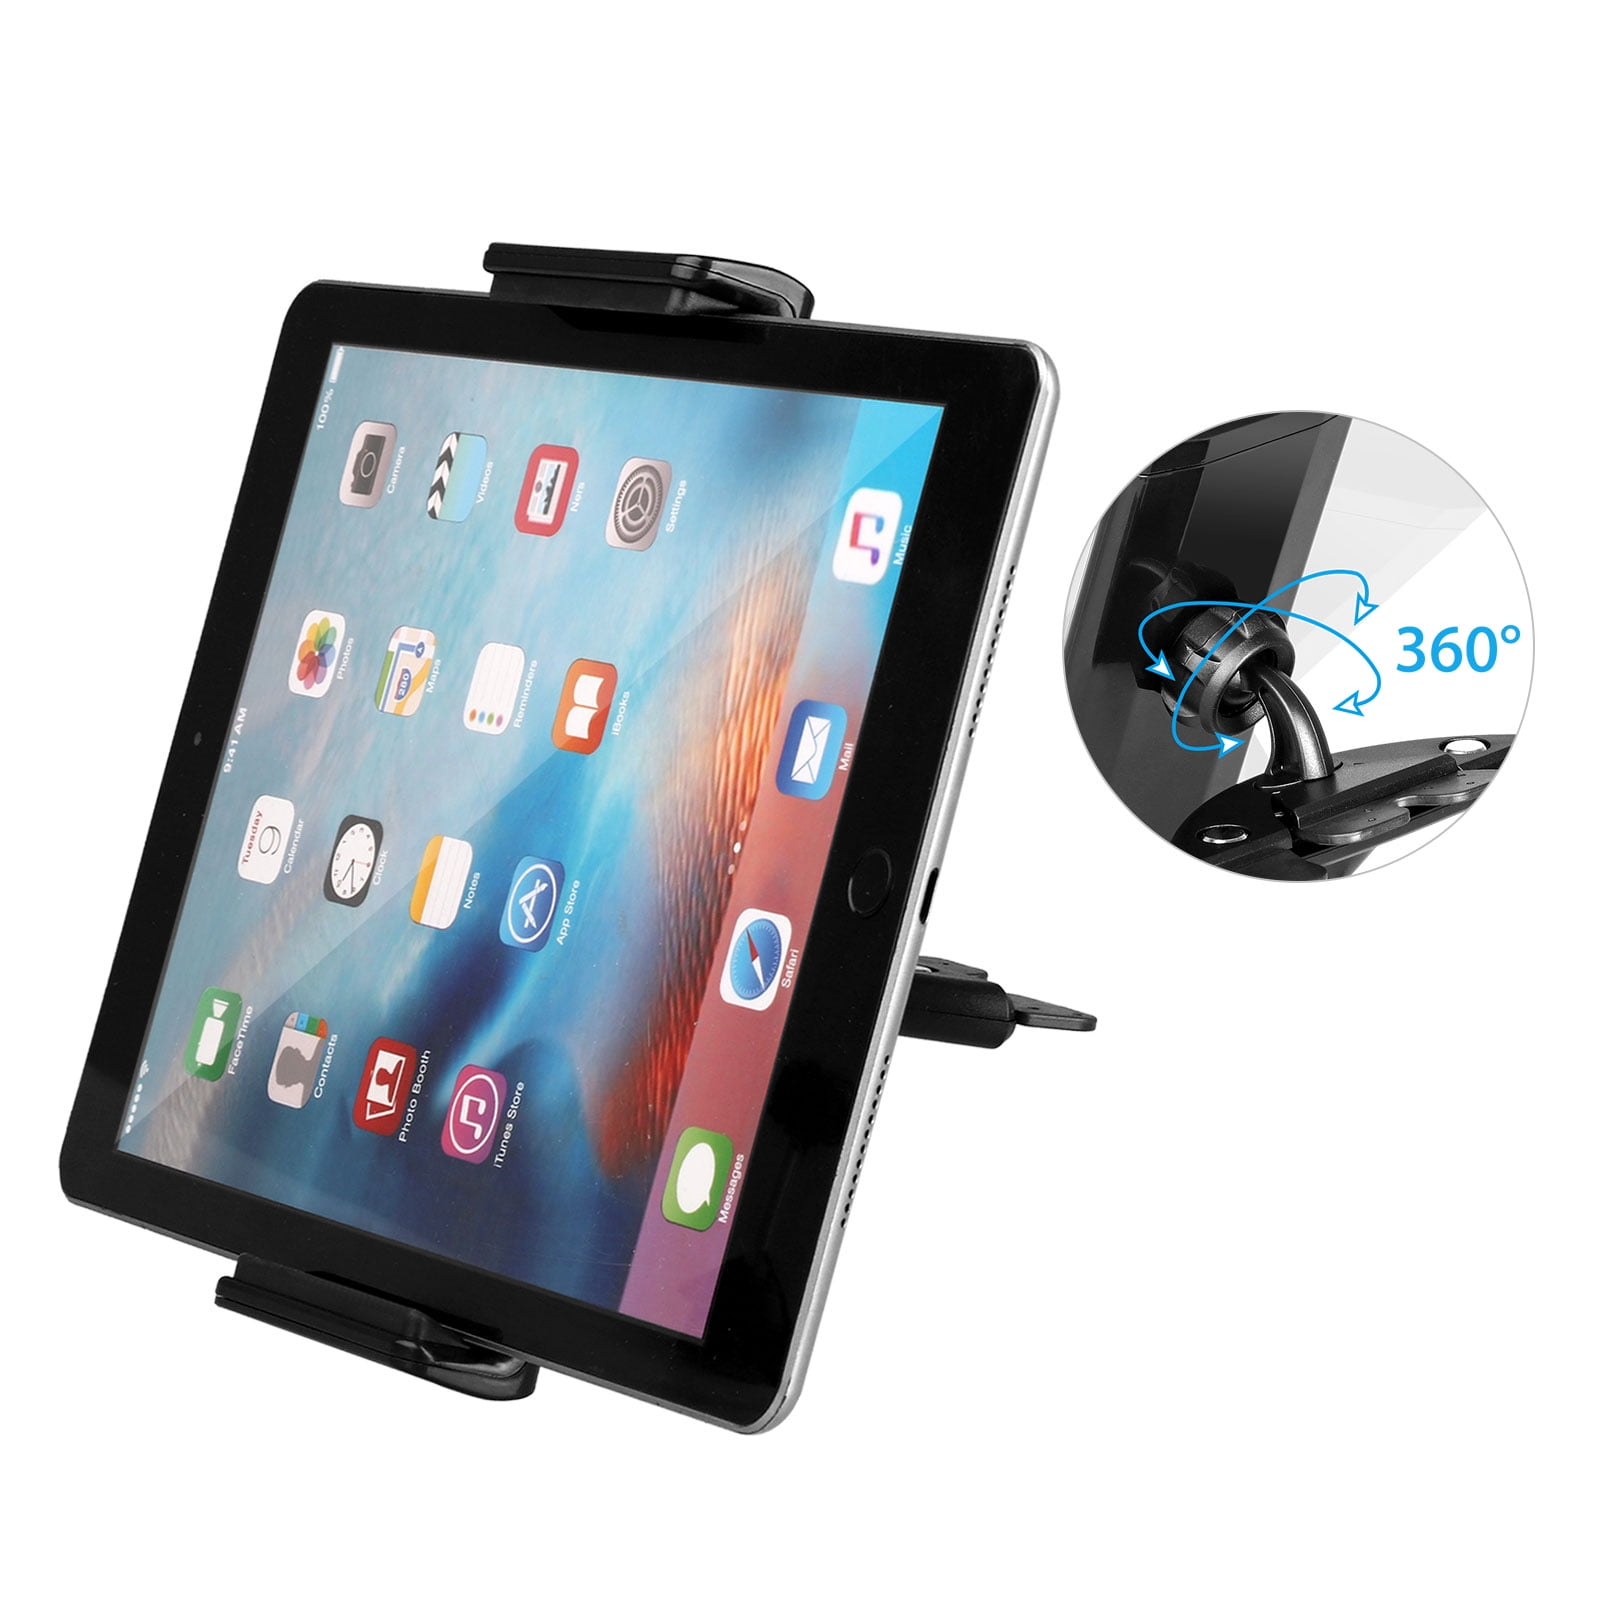 Car CD Slot Mount Holder Stand For ipad 7 ~ 11 inch Tablet PC Samsung Galaxy Tab 